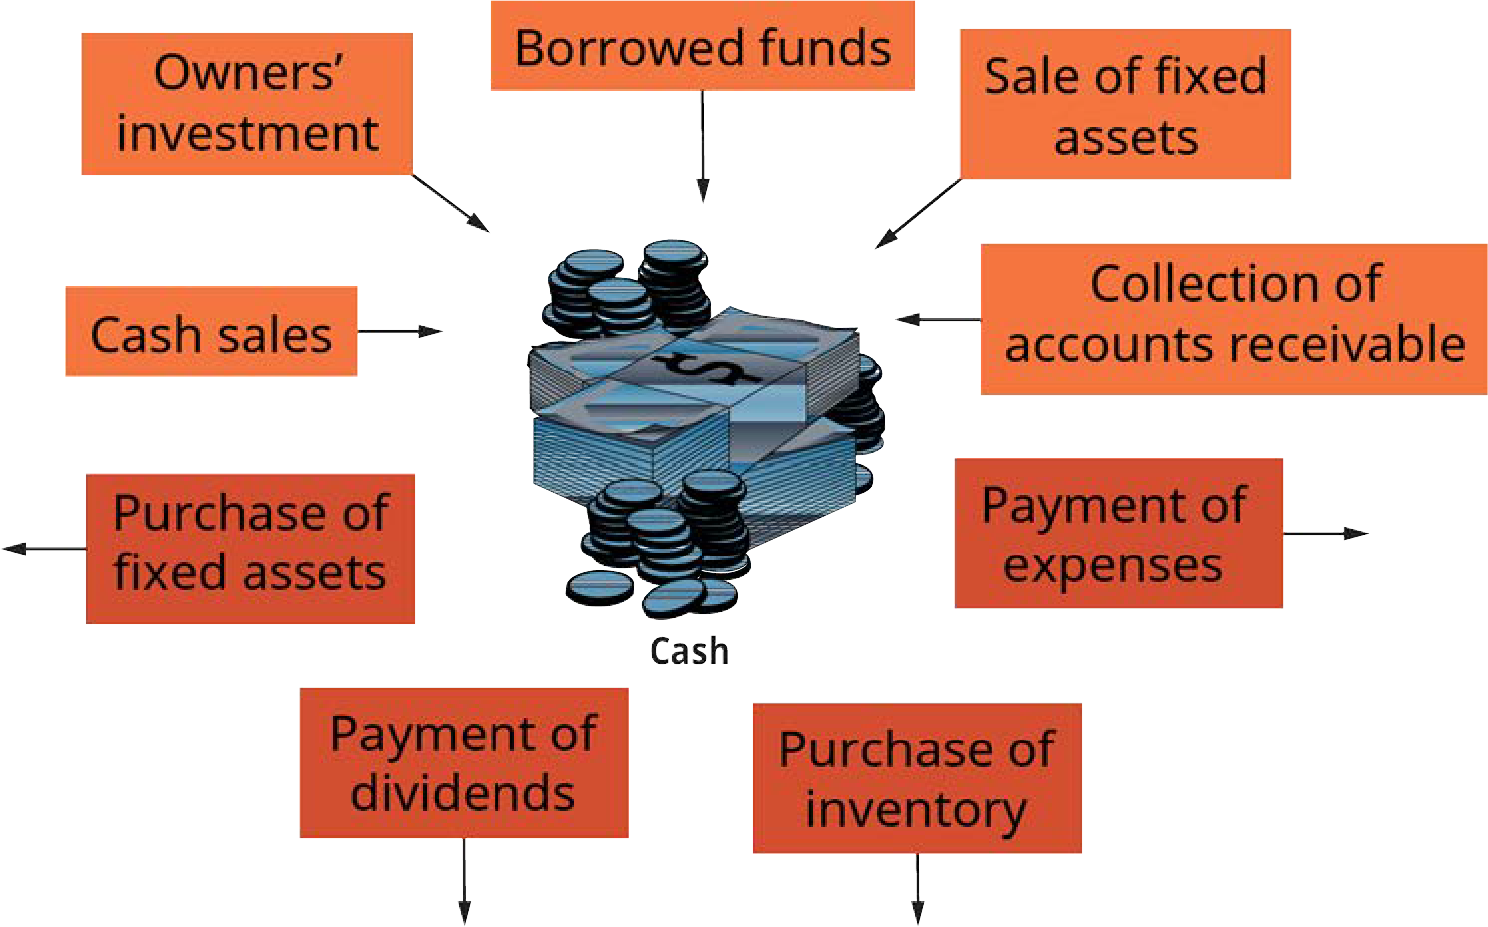 Exhibit 8.1 How Cash Flows through a Business (Attribution: Copyright Rice University, OpenStax, under CC BY 4.0 license.)